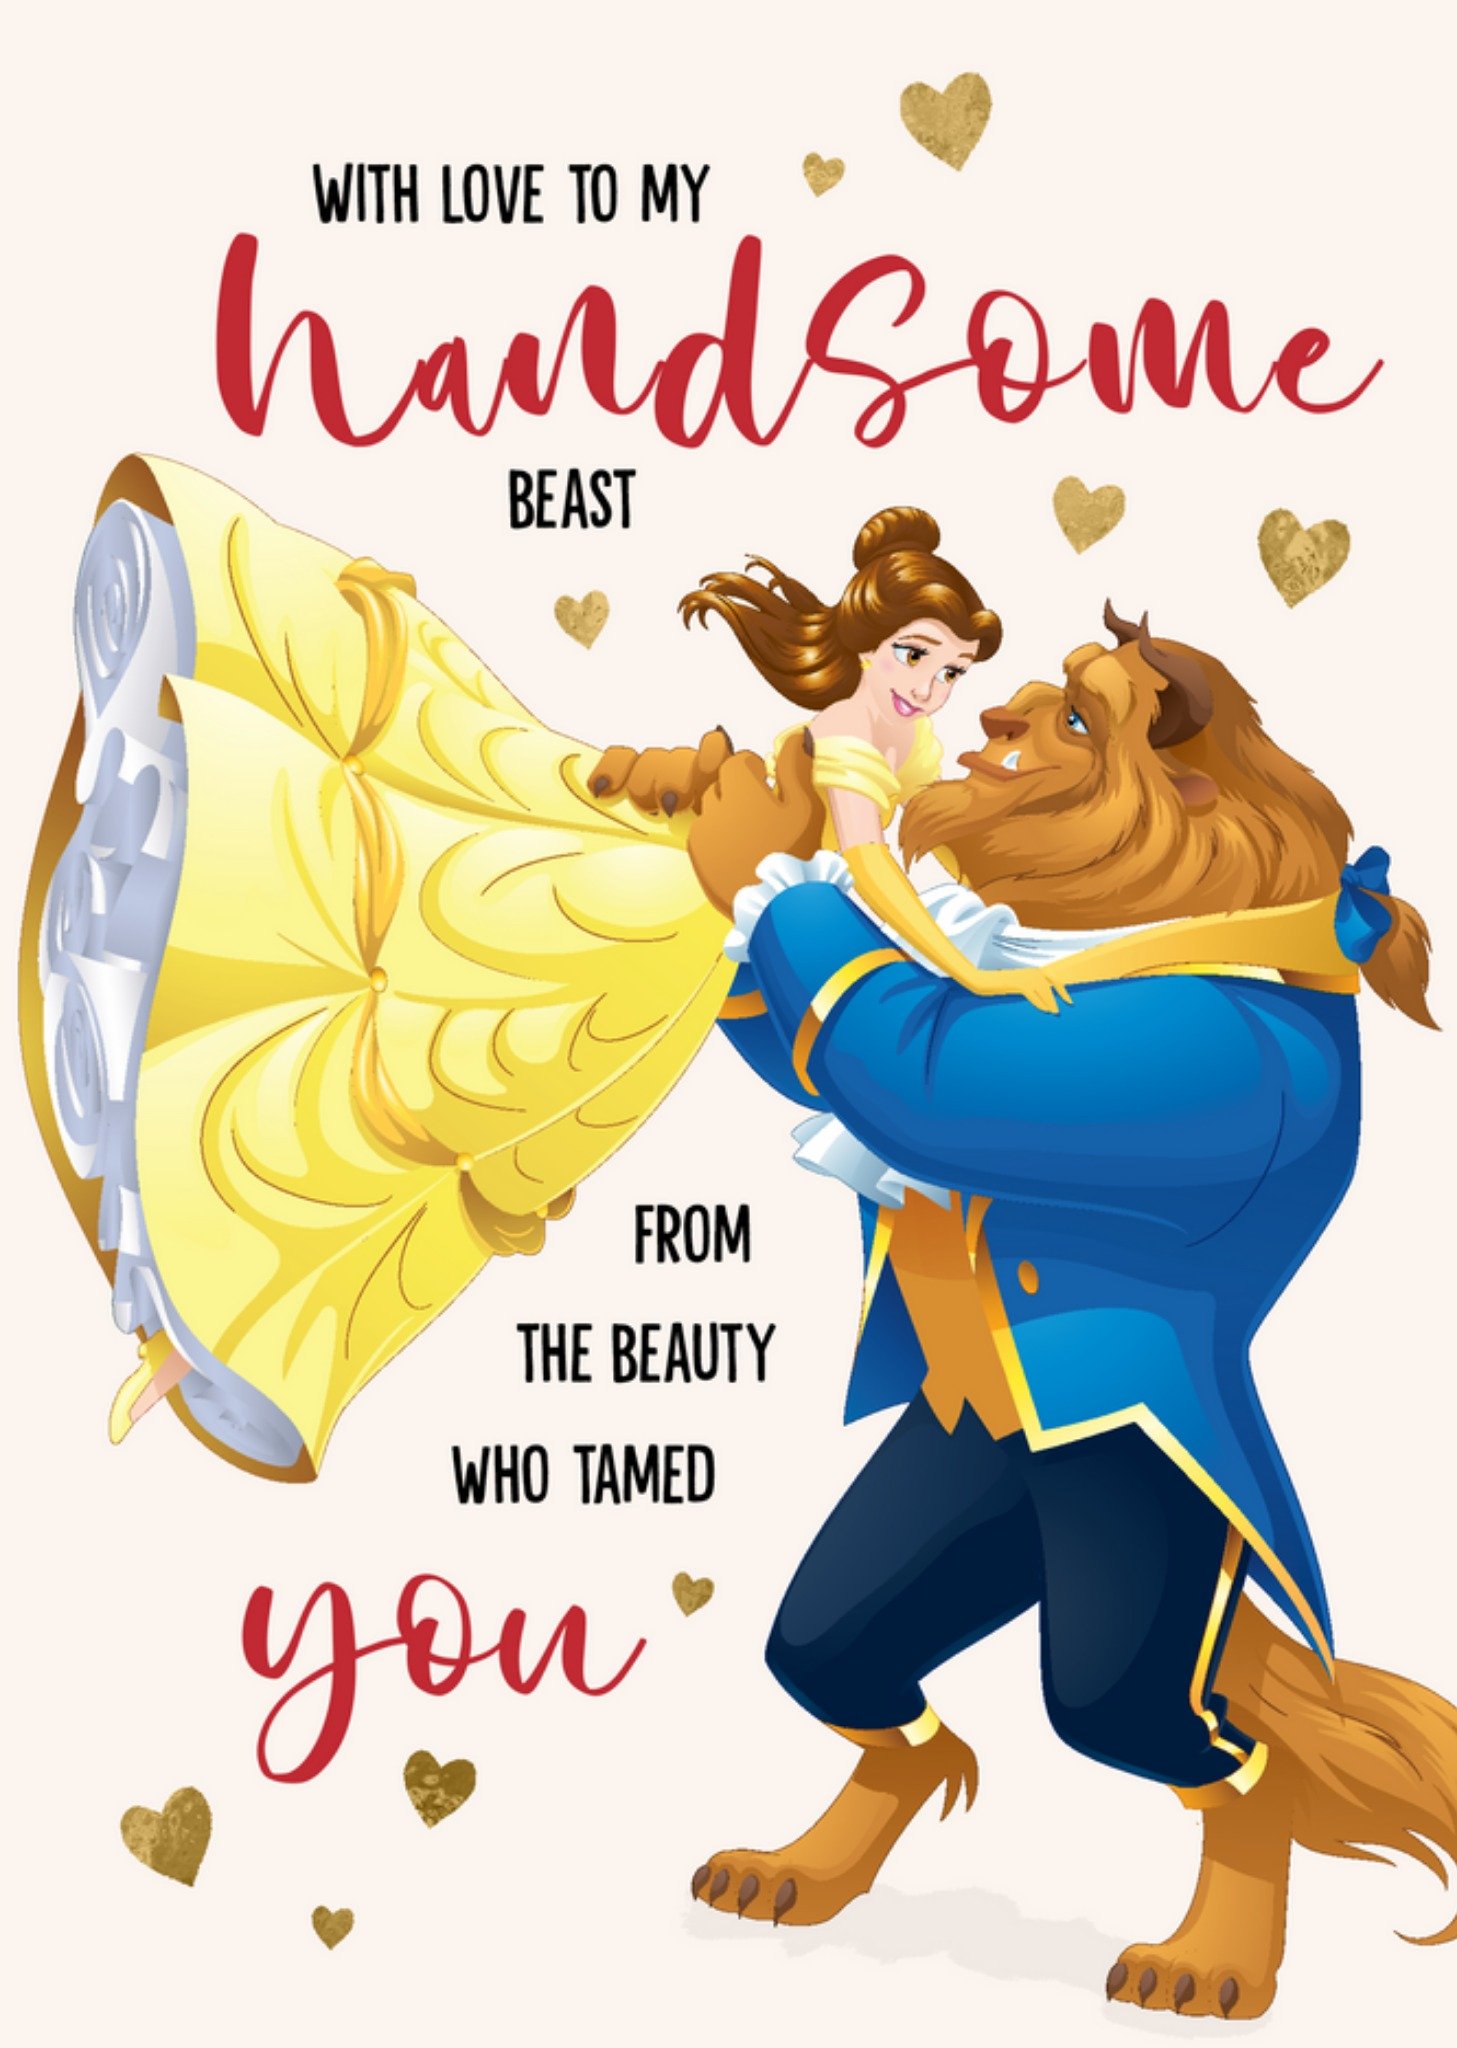 Disney Princesses Disney Beauty And The Beast With Love To My Handsome Beast Card, Large